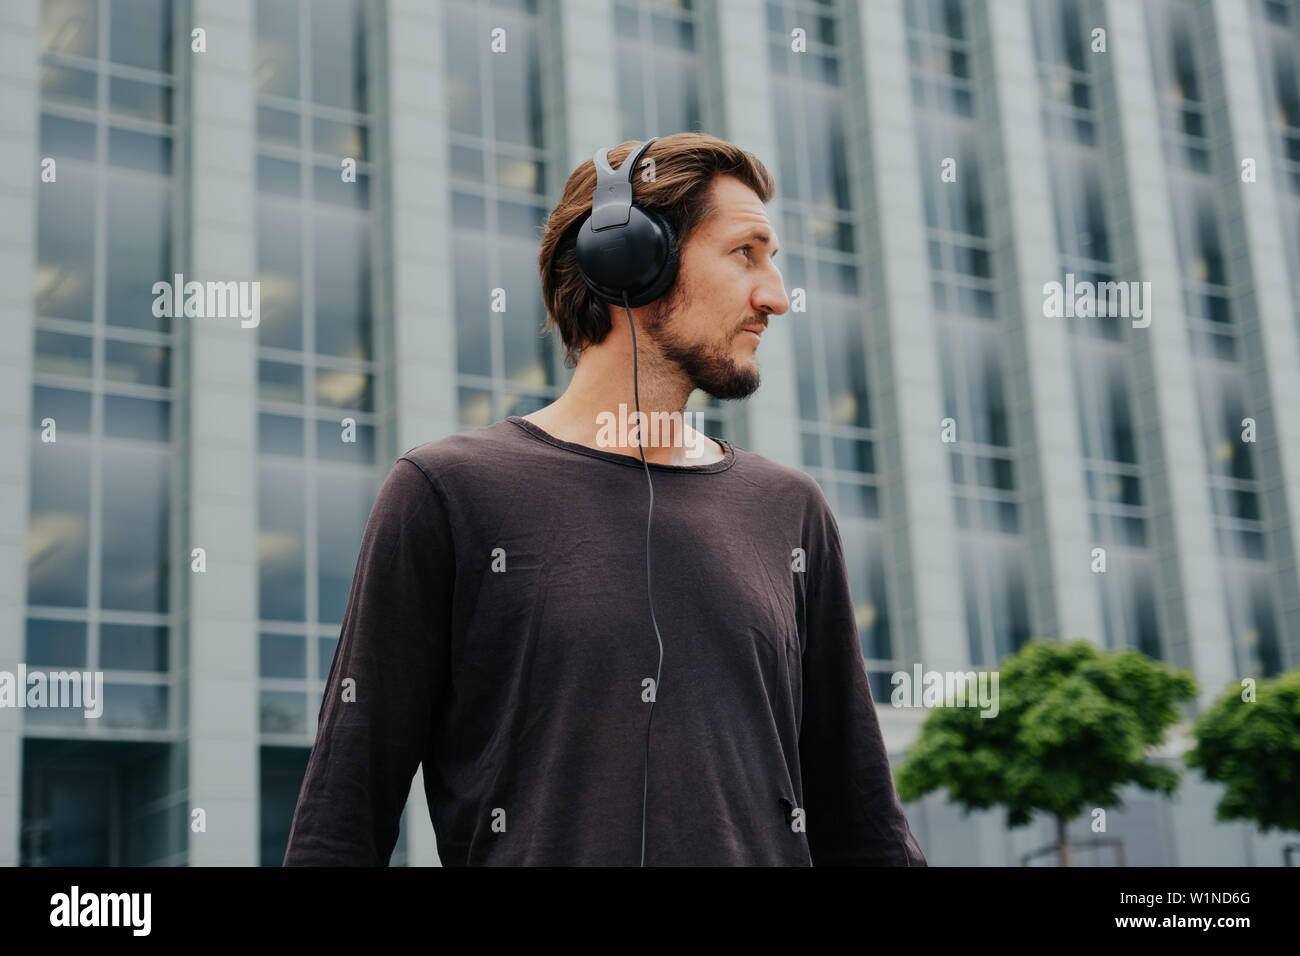 The freelance guy listens to music on headphones, backpac and works on a laptop in the center of a big city. Stock Photo